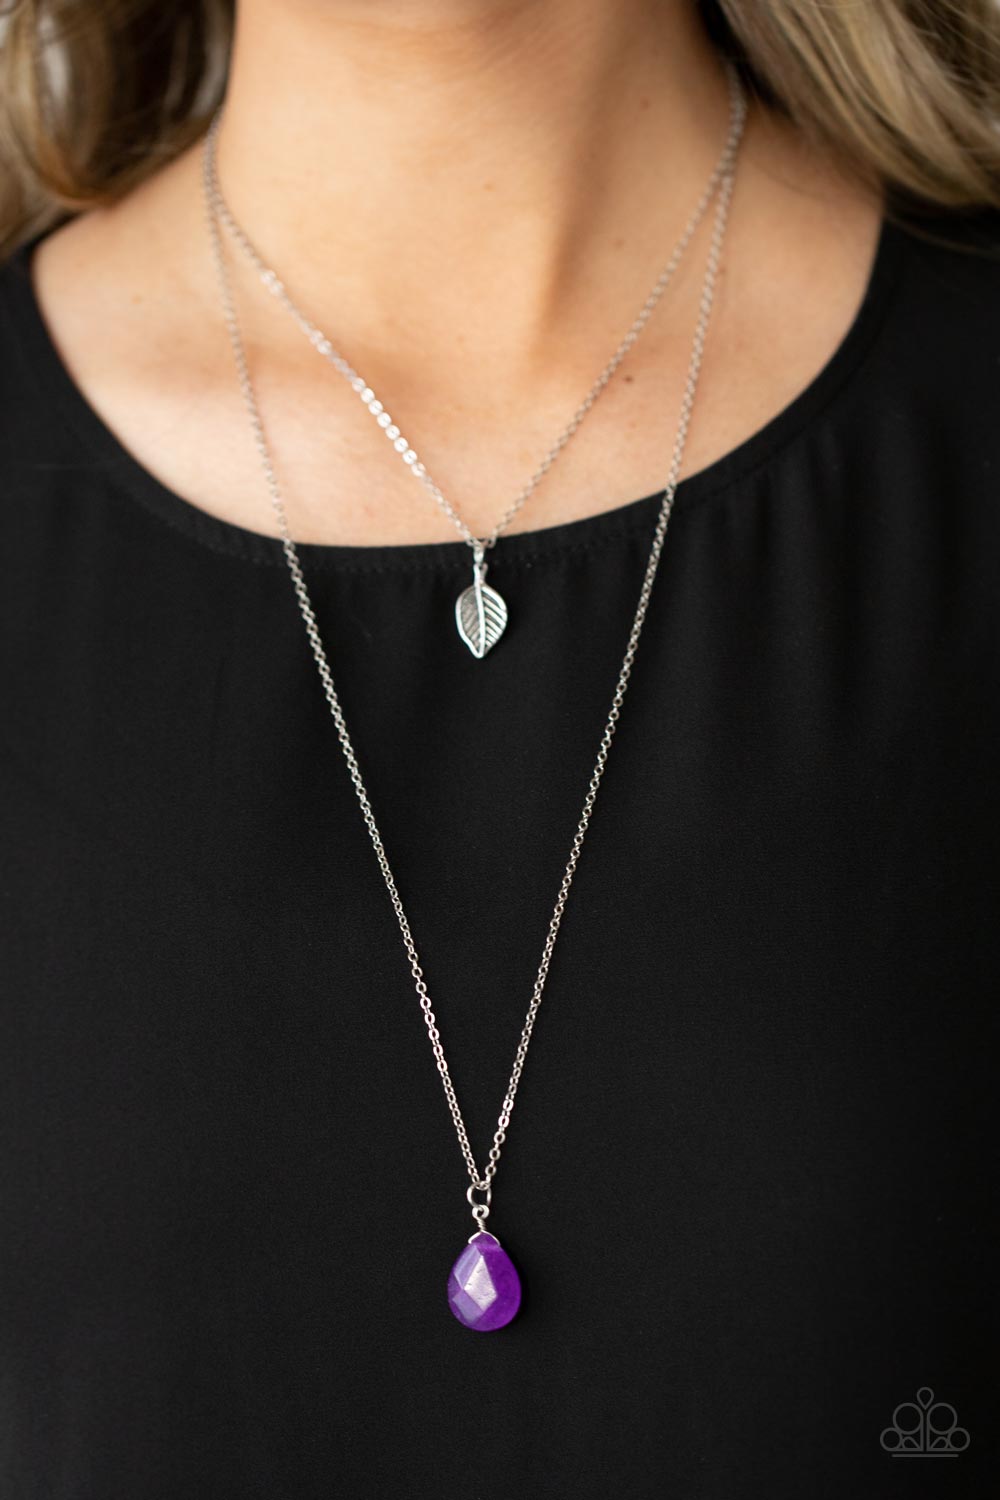 PRE-ORDER - Paparazzi Natural Essence - Purple - Necklace & Earrings - $5 Jewelry with Ashley Swint